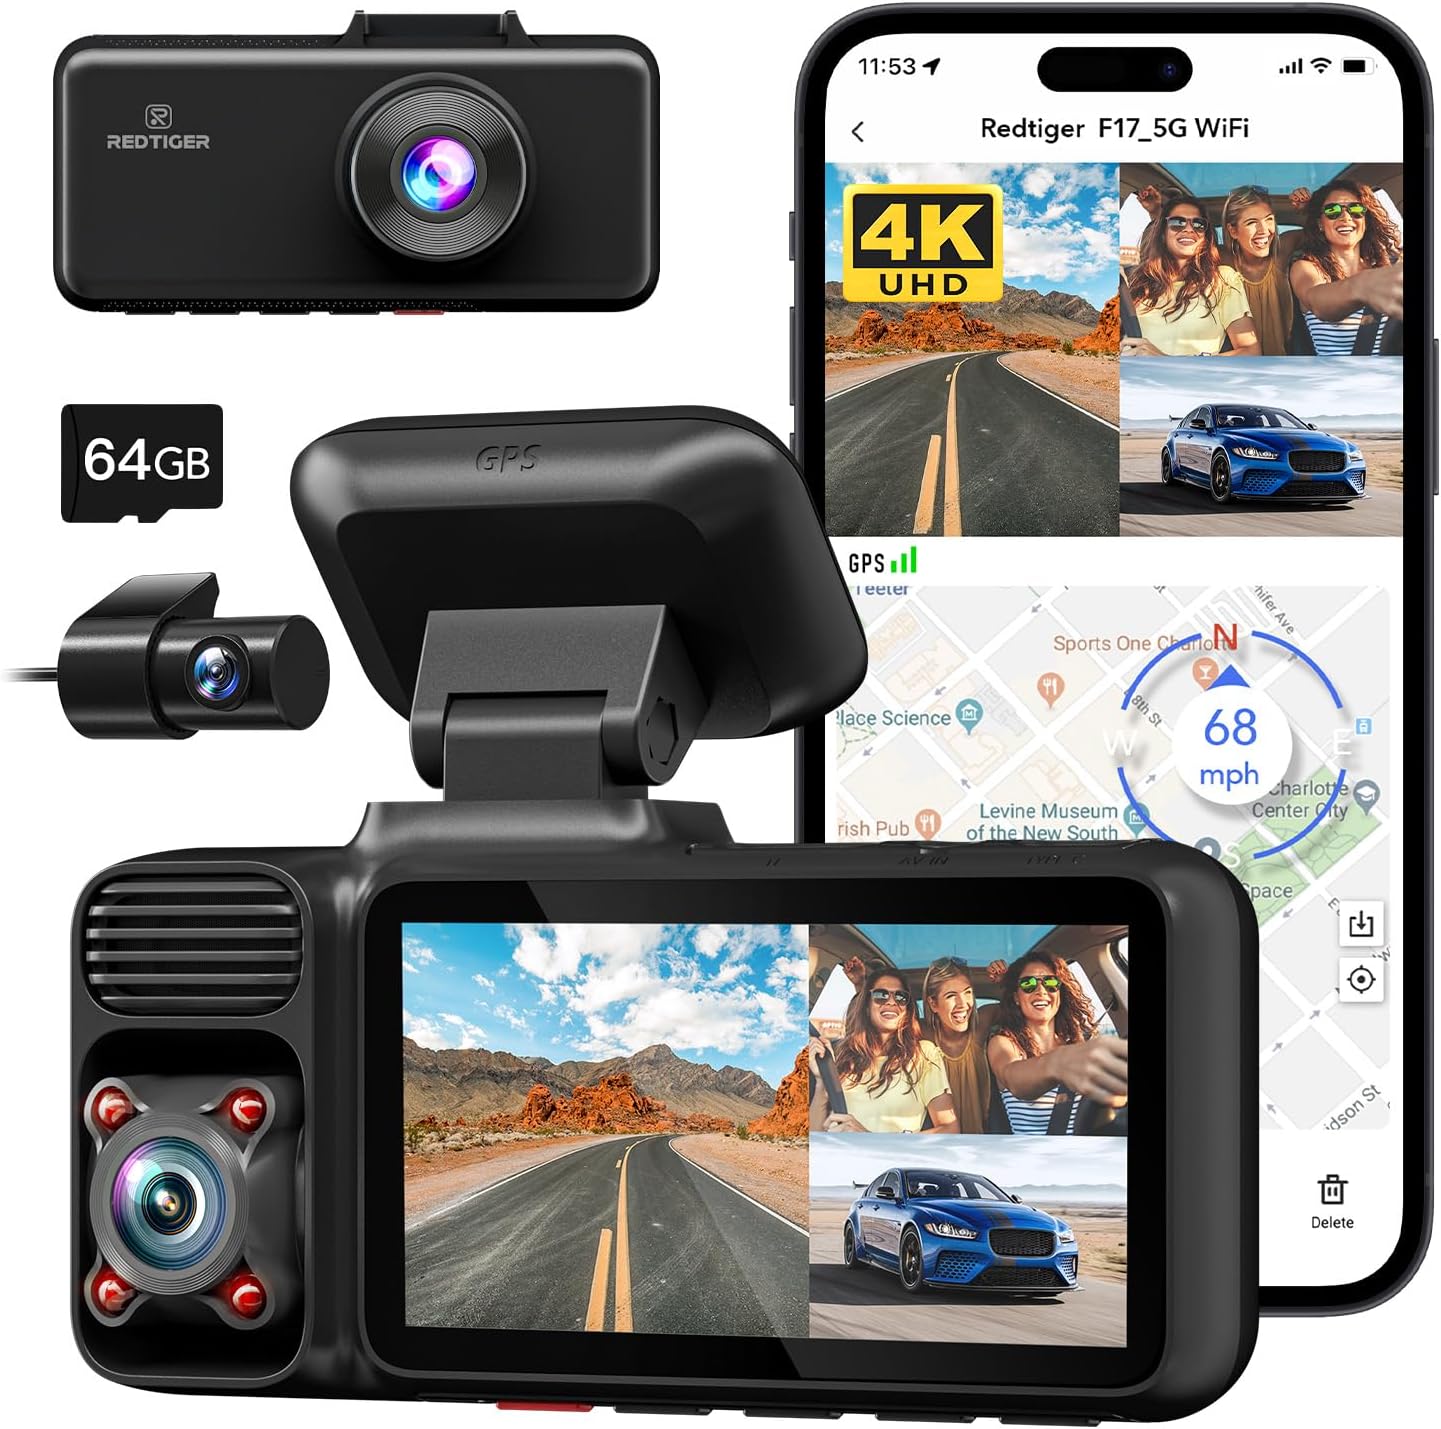 REDTIGER 3 Channel Dash Cam, 4K+1080P+1080P Front and Rear Inside Triple Car Camera,Built-in GPS and 5.0 GHz WiFi, 3 inch IPS Screen, WDR IR Night Vision, Free 64GB SD Card, G-Sensor, Parking